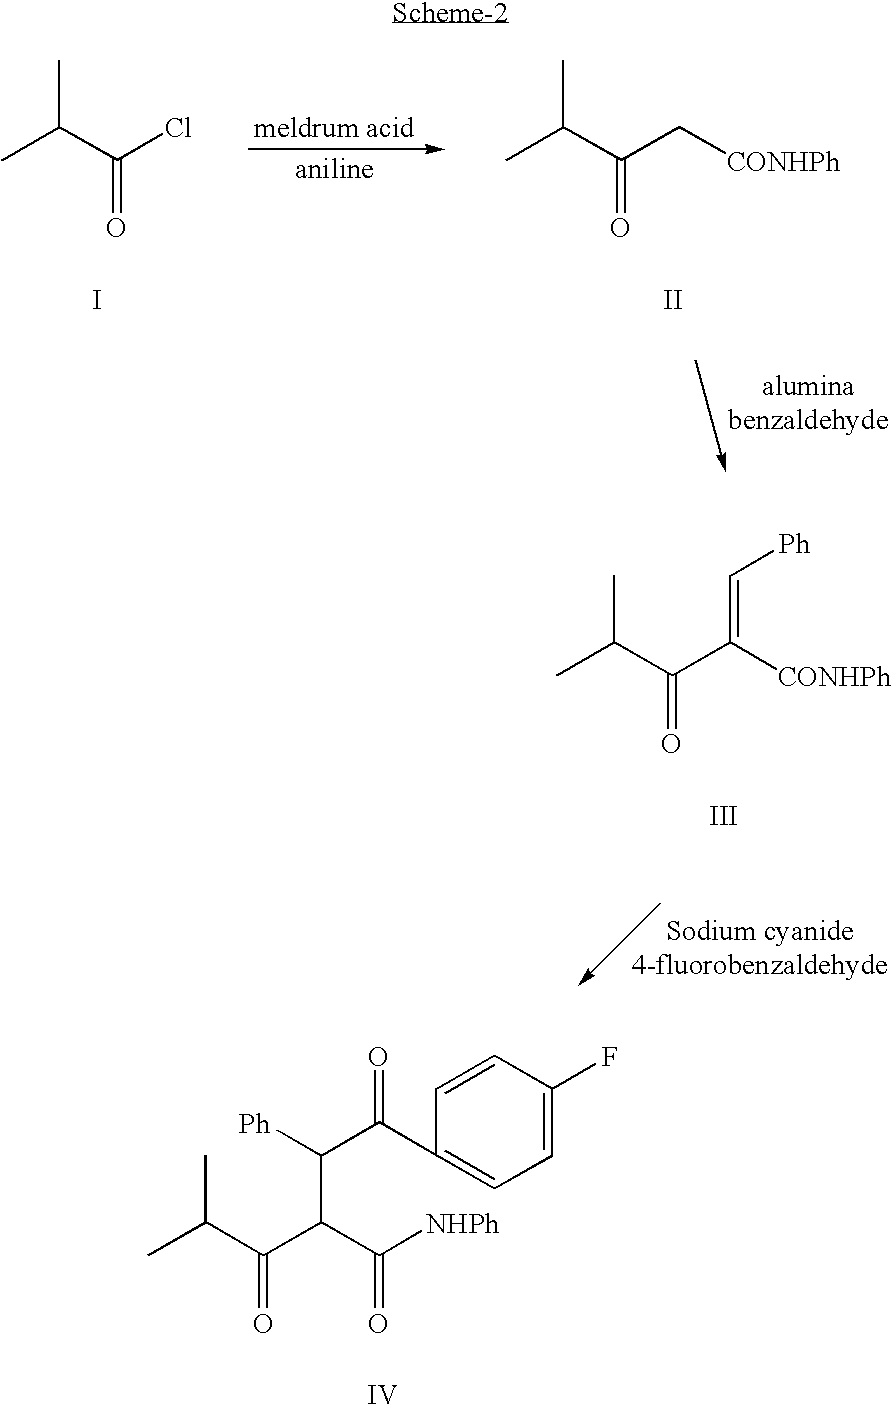 Process for the synthesis of atorvastatin and phenylboronates as intermediate compounds